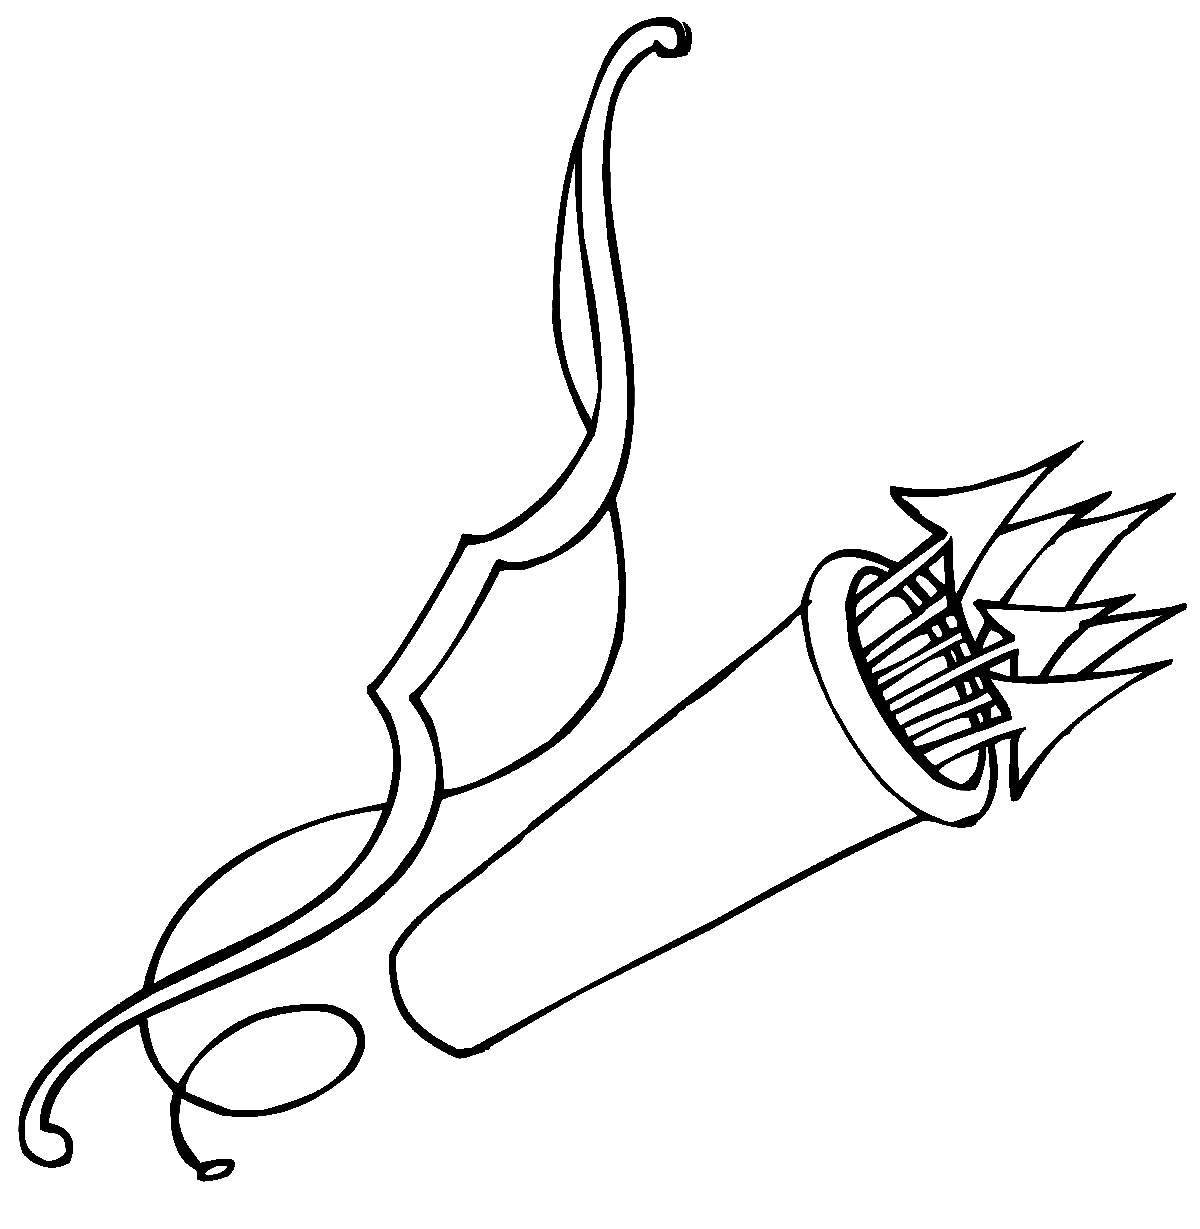 Glorious bow and arrow coloring page